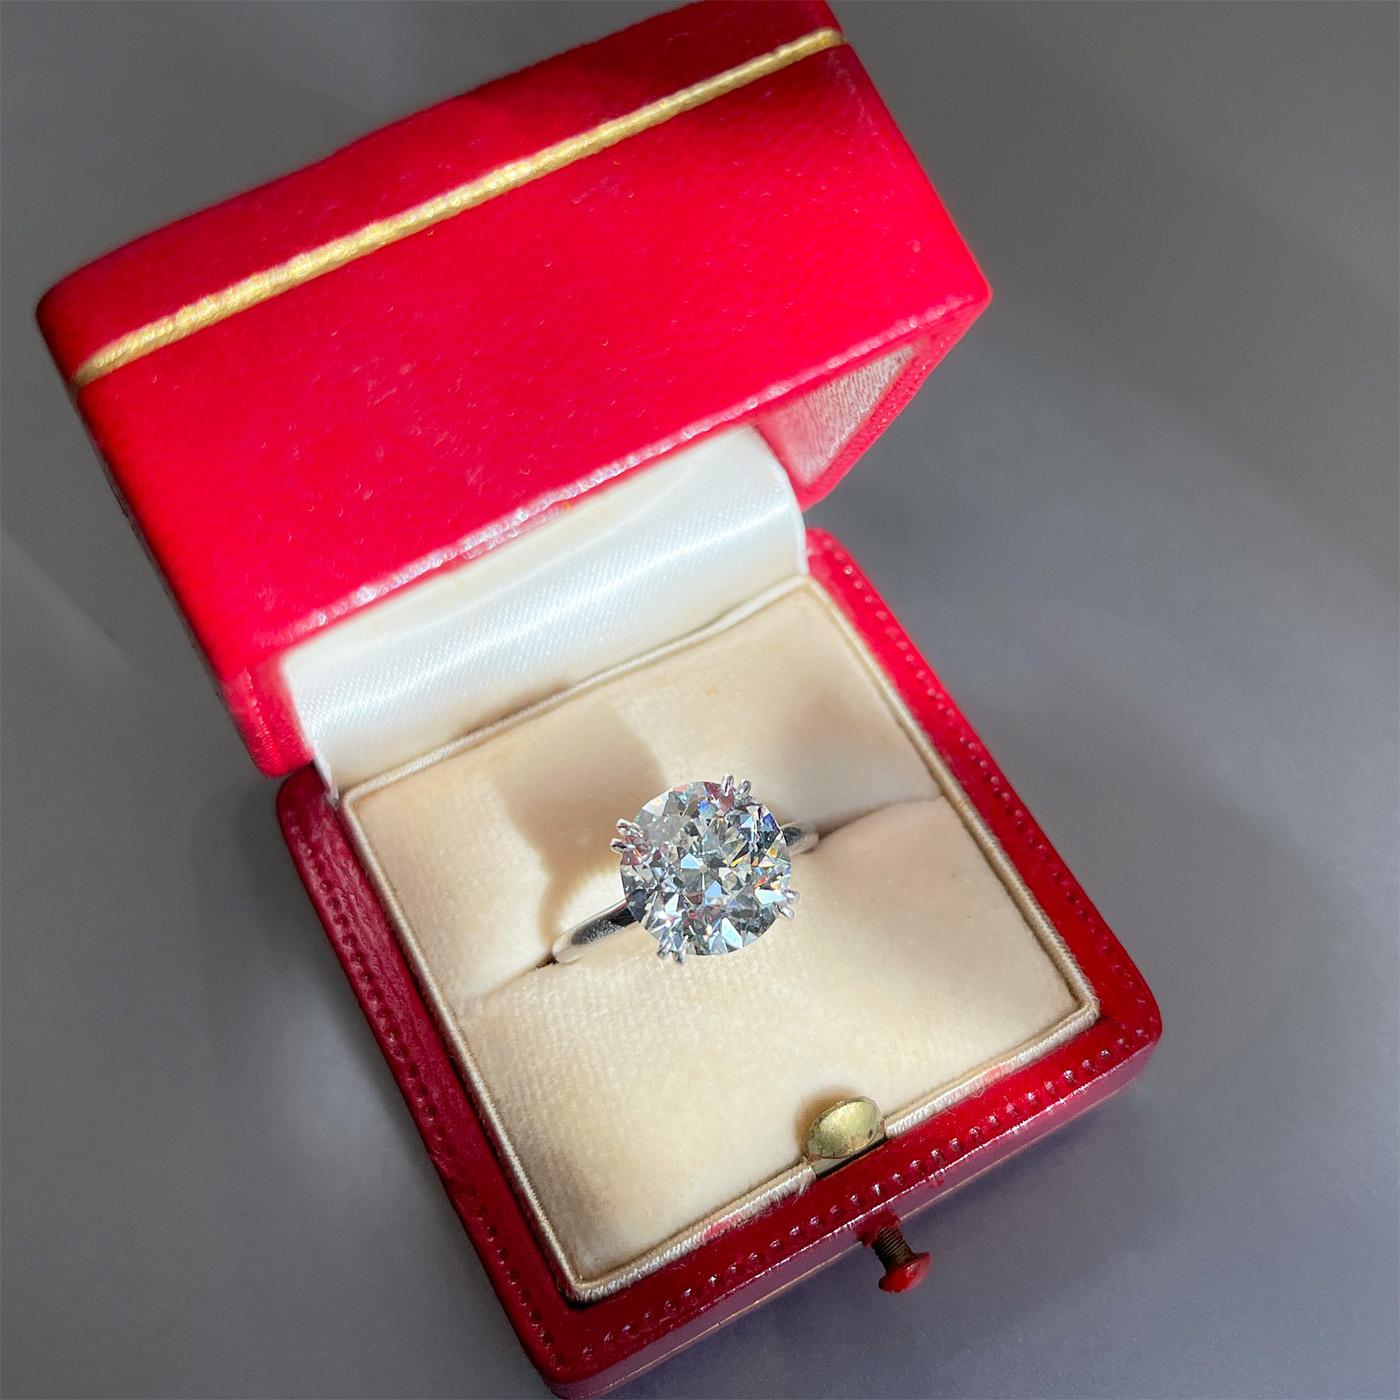 Vintage 4.05 Carat GIA Old European Cut Diamond Engagement Ring by Cartier For Sale 1